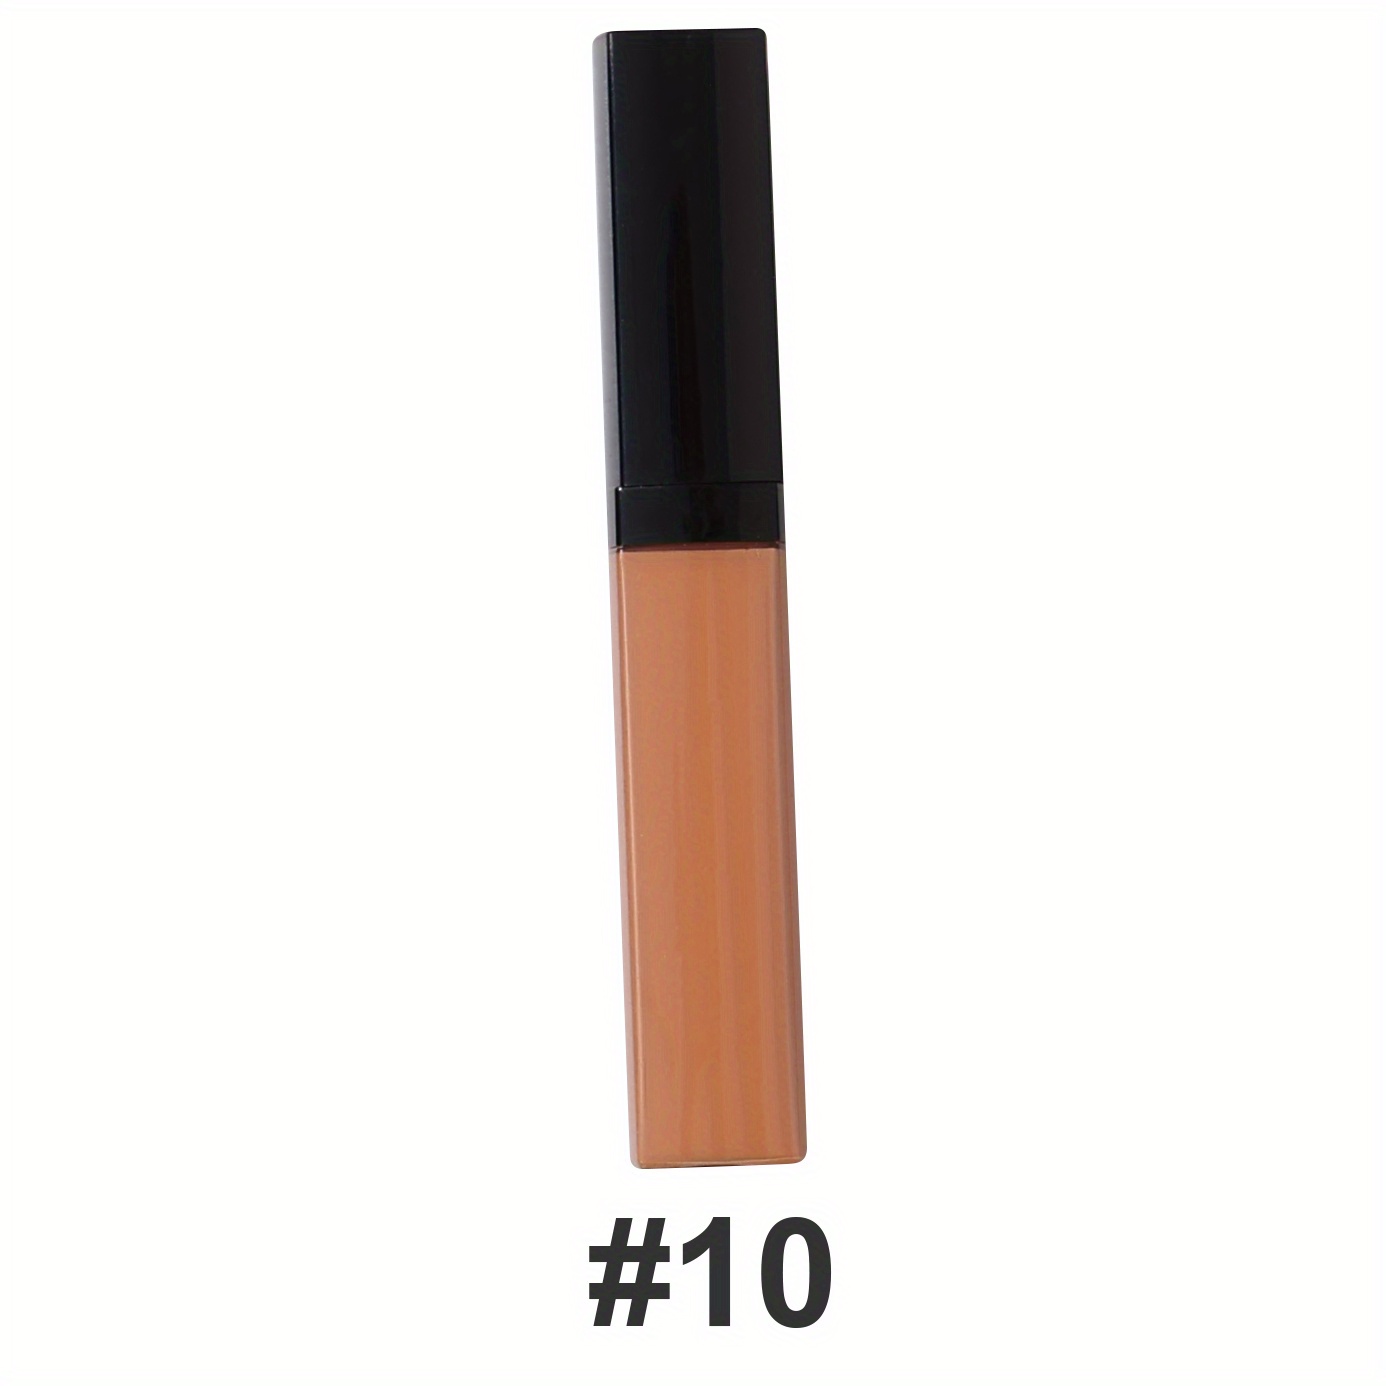 18 Colors Highly Pigmented Concealer - Full Coverage, Light Beige